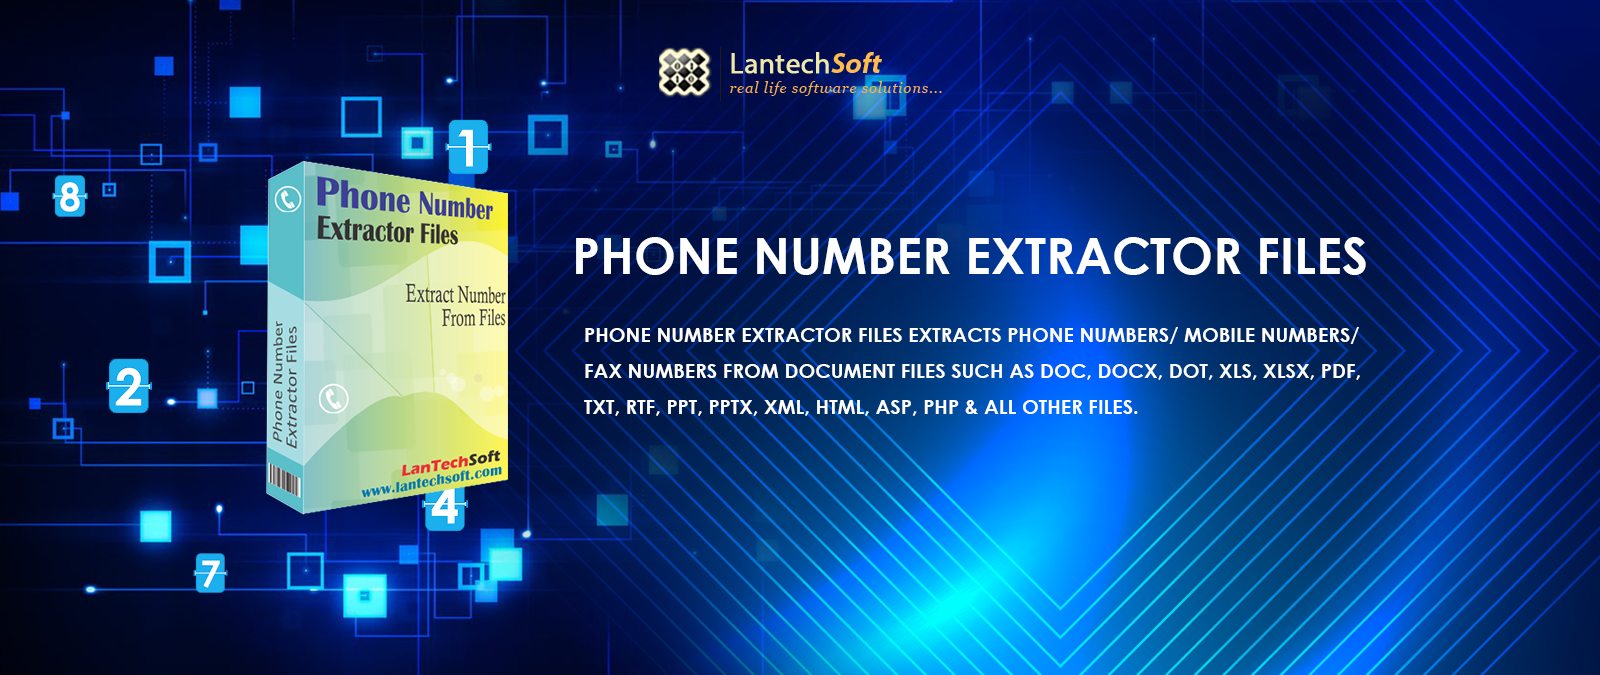 whatsapp group phone number extractor